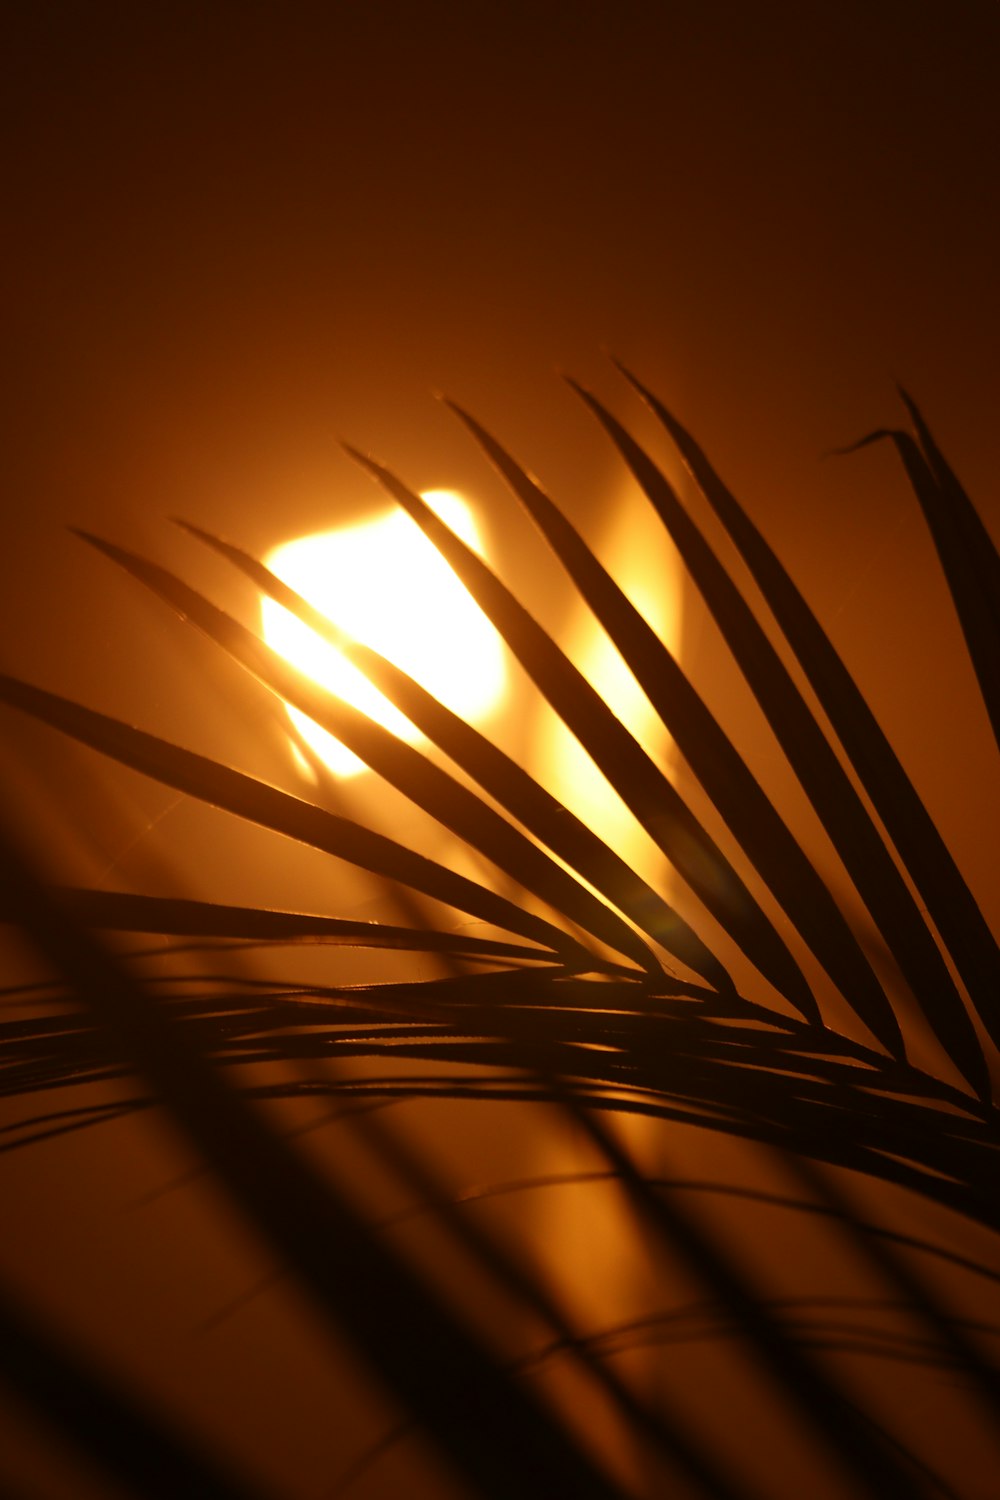 a close up of a palm tree with the sun in the background